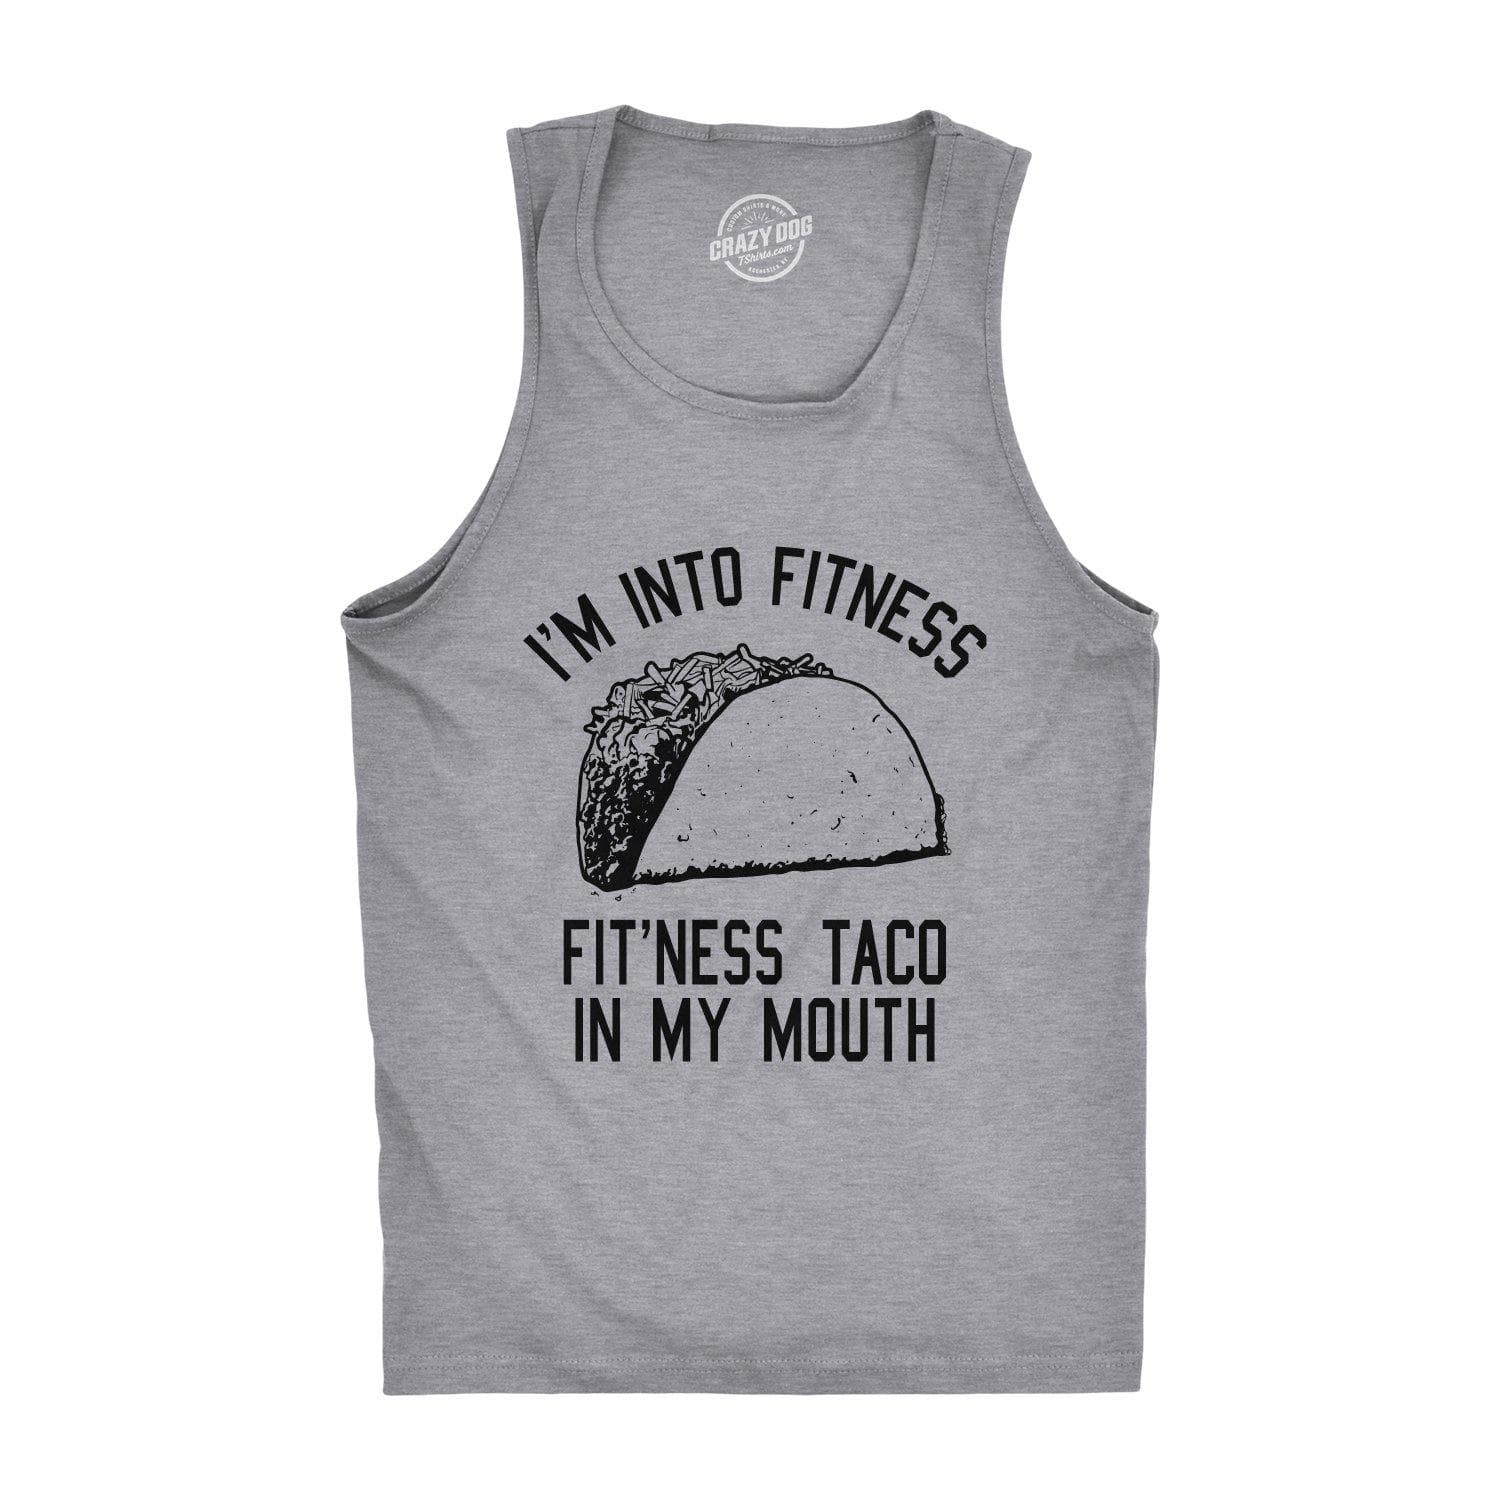 I'm Into Fitness Fit'ness Taco In My Mouth Men's Tank Top  -  Crazy Dog T-Shirts